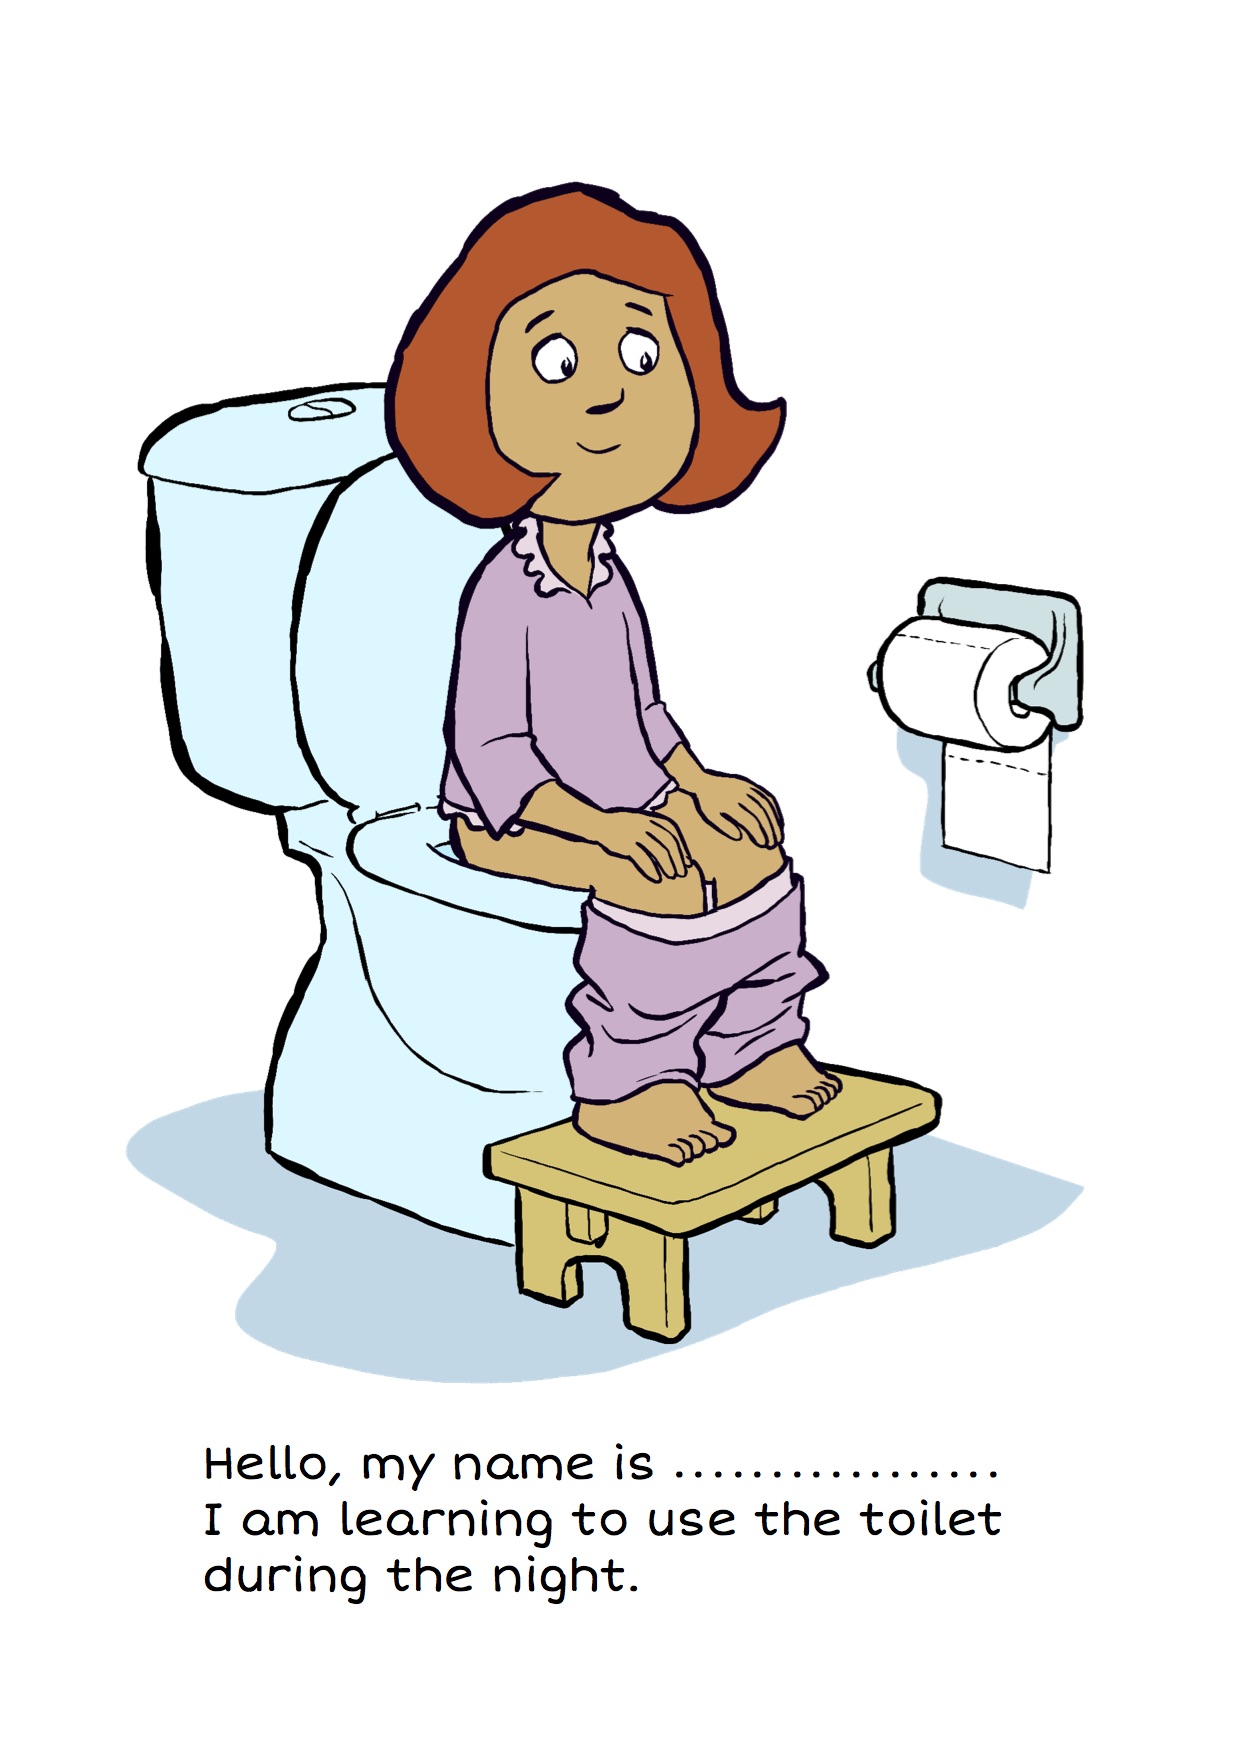 Toilet Time: A story for girls learning to use the toilet during the night